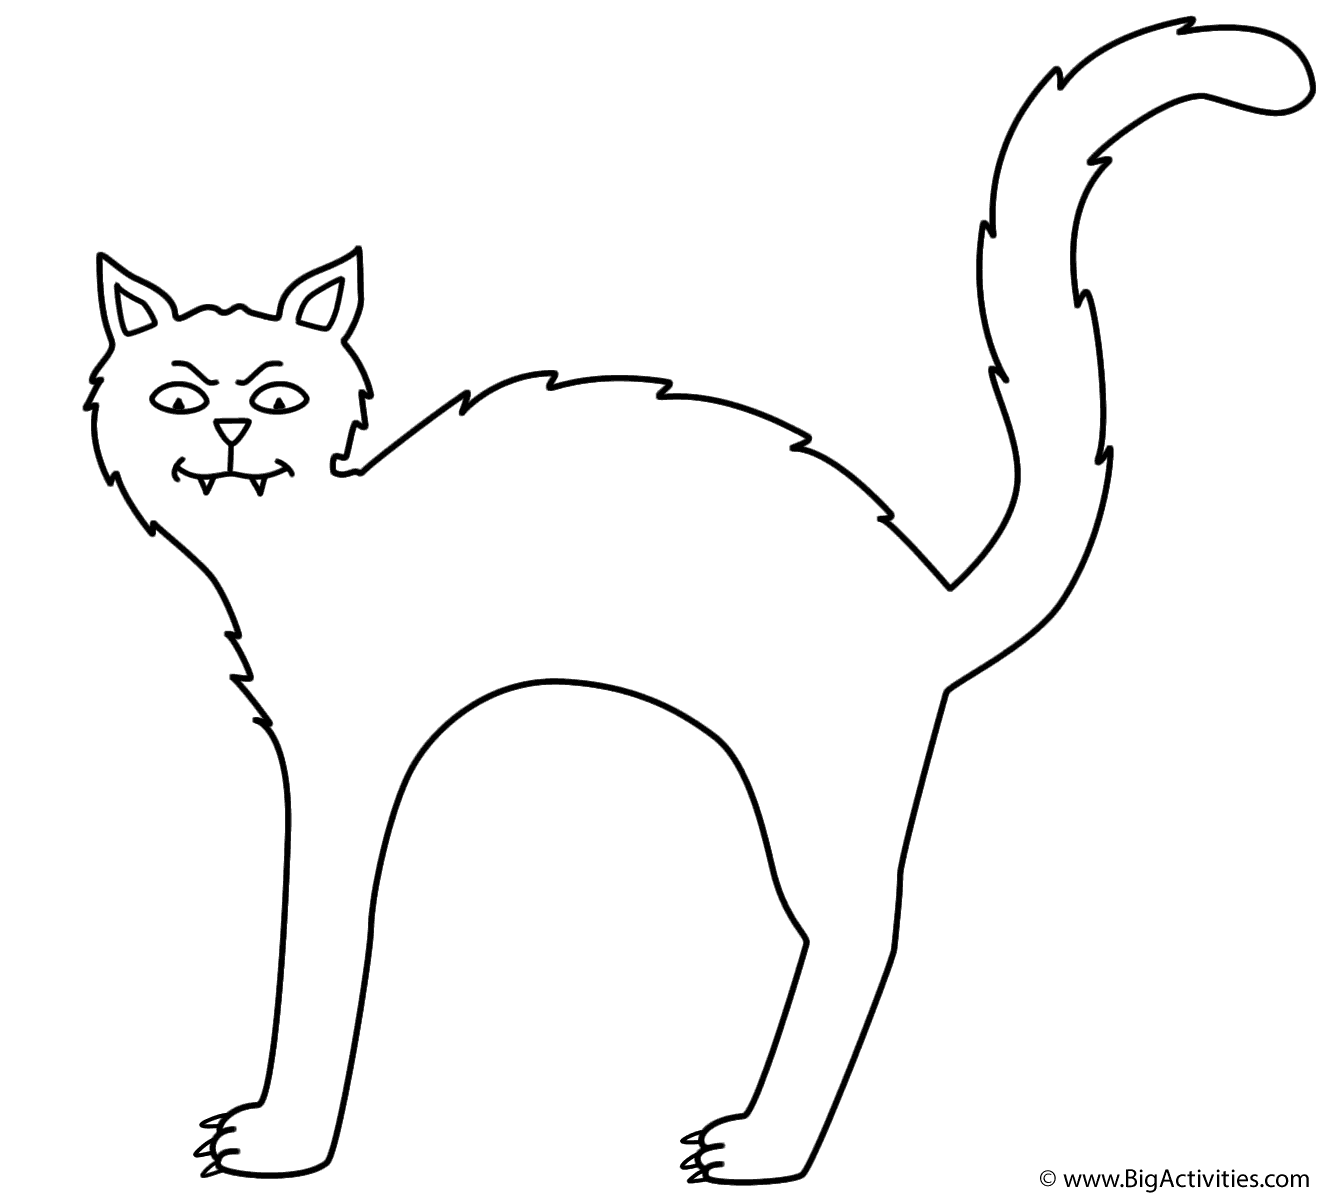 Black cat Coloring Page (Halloween)